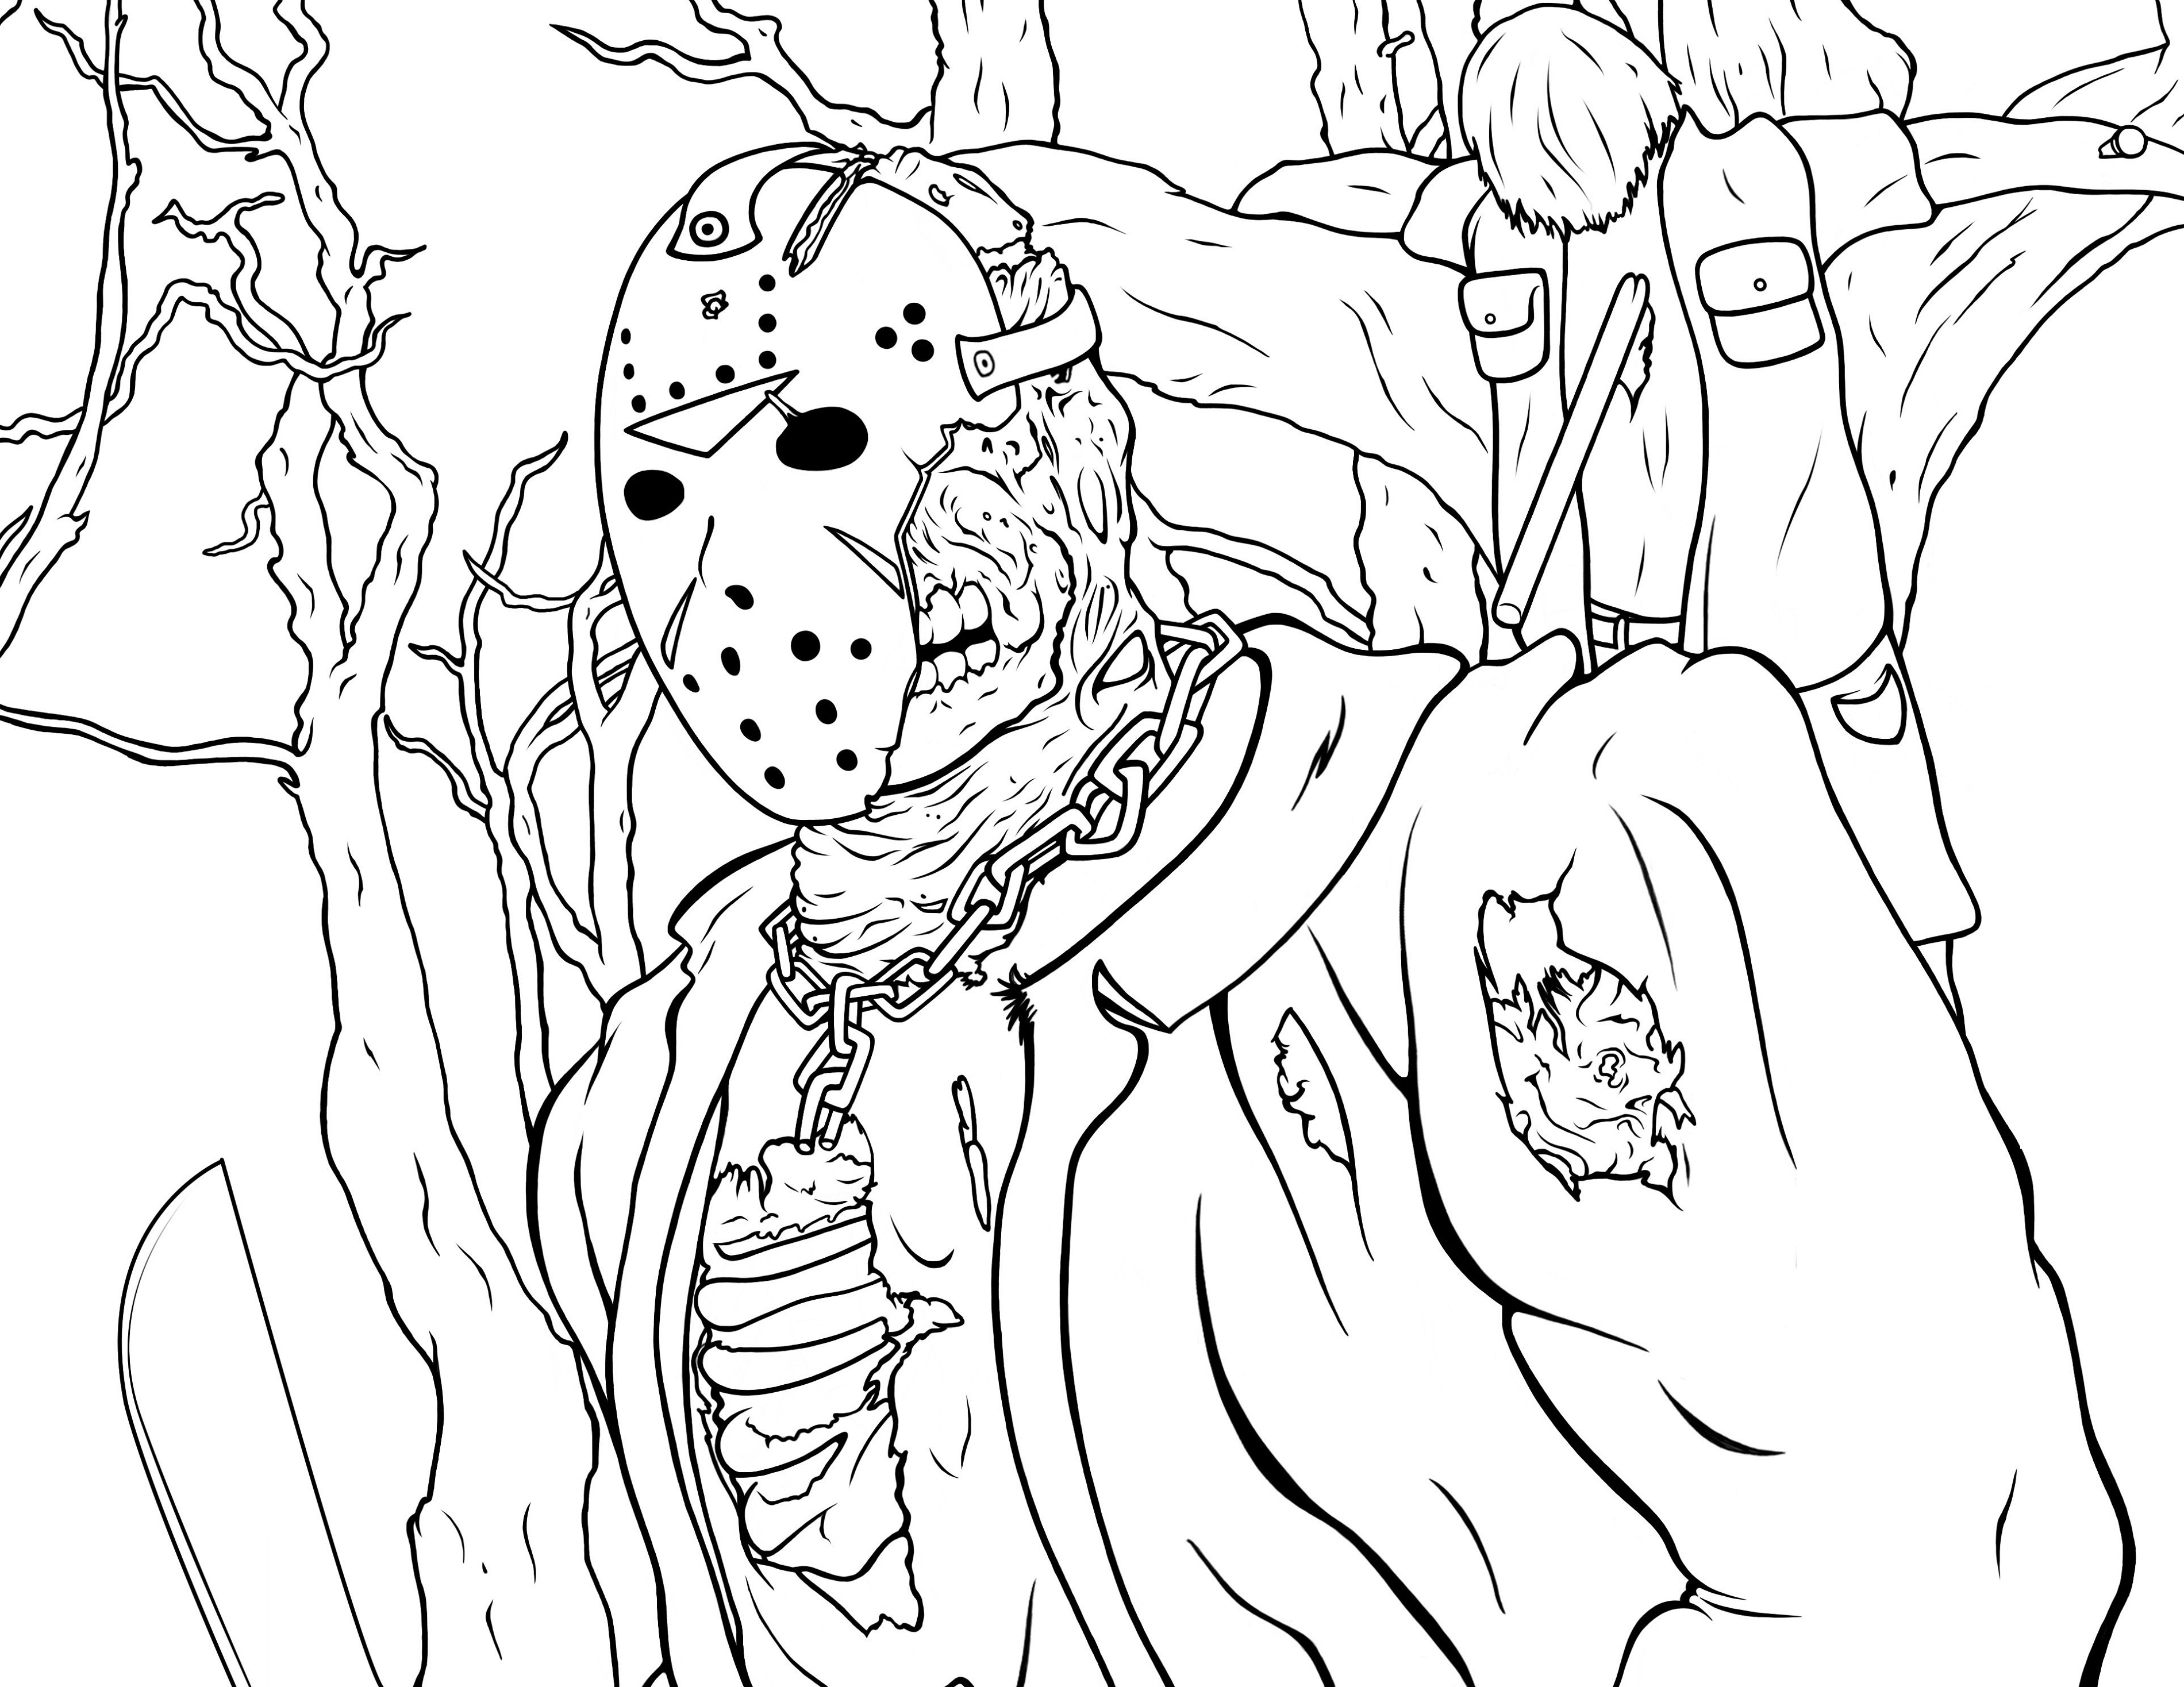 Jason Coloring Pages Friday the 13th ...